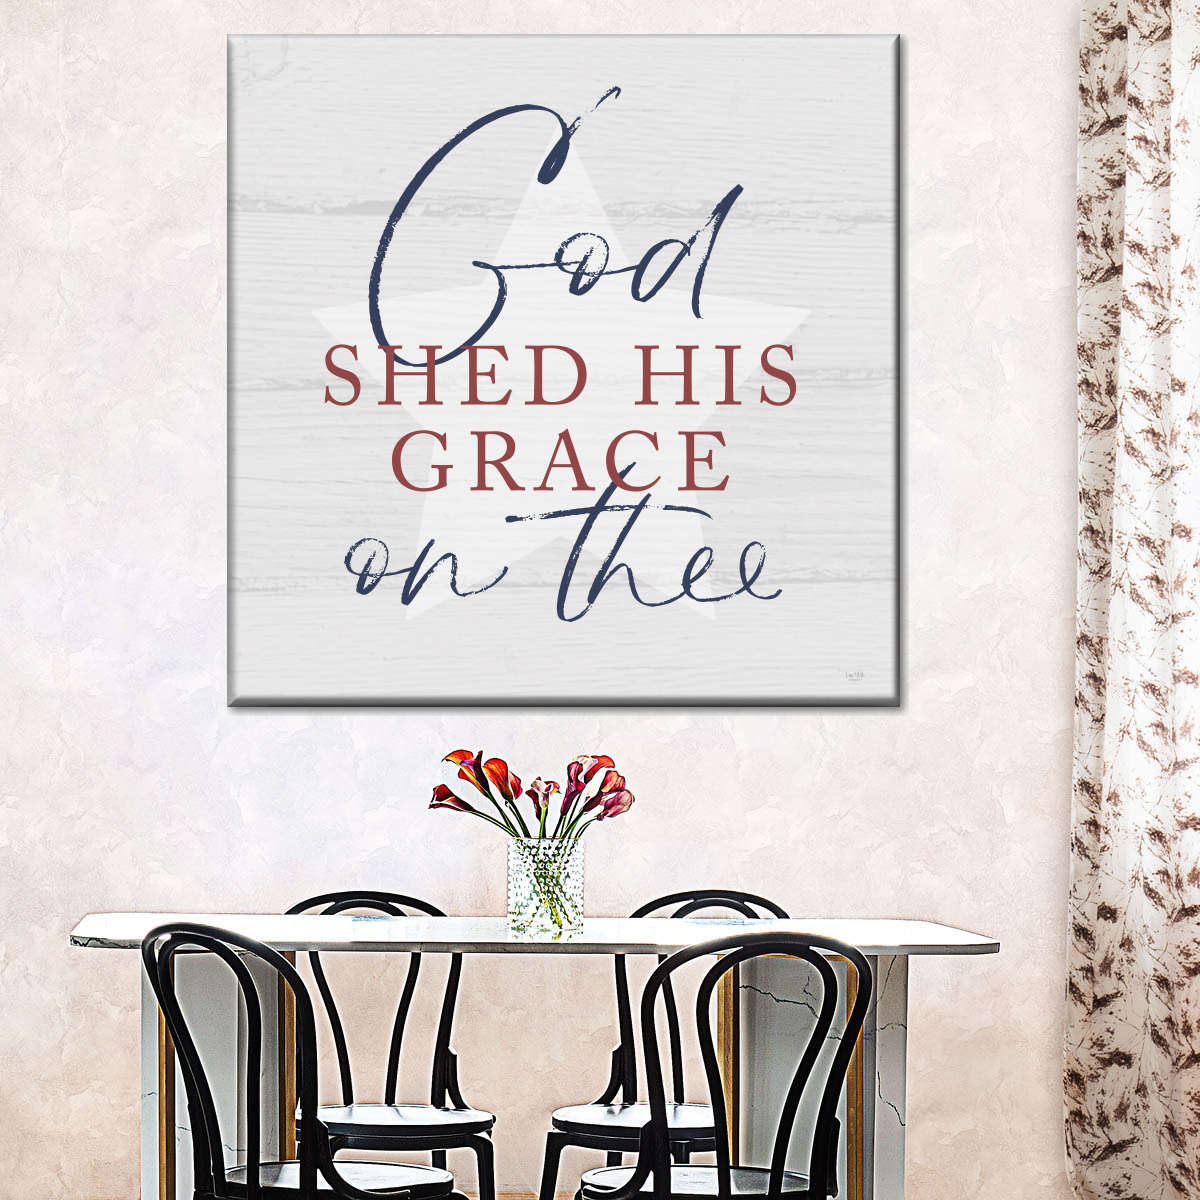 God Shed His Grace Square Canvas Wall Art - Christian Wall Decor - Christian Wall Hanging